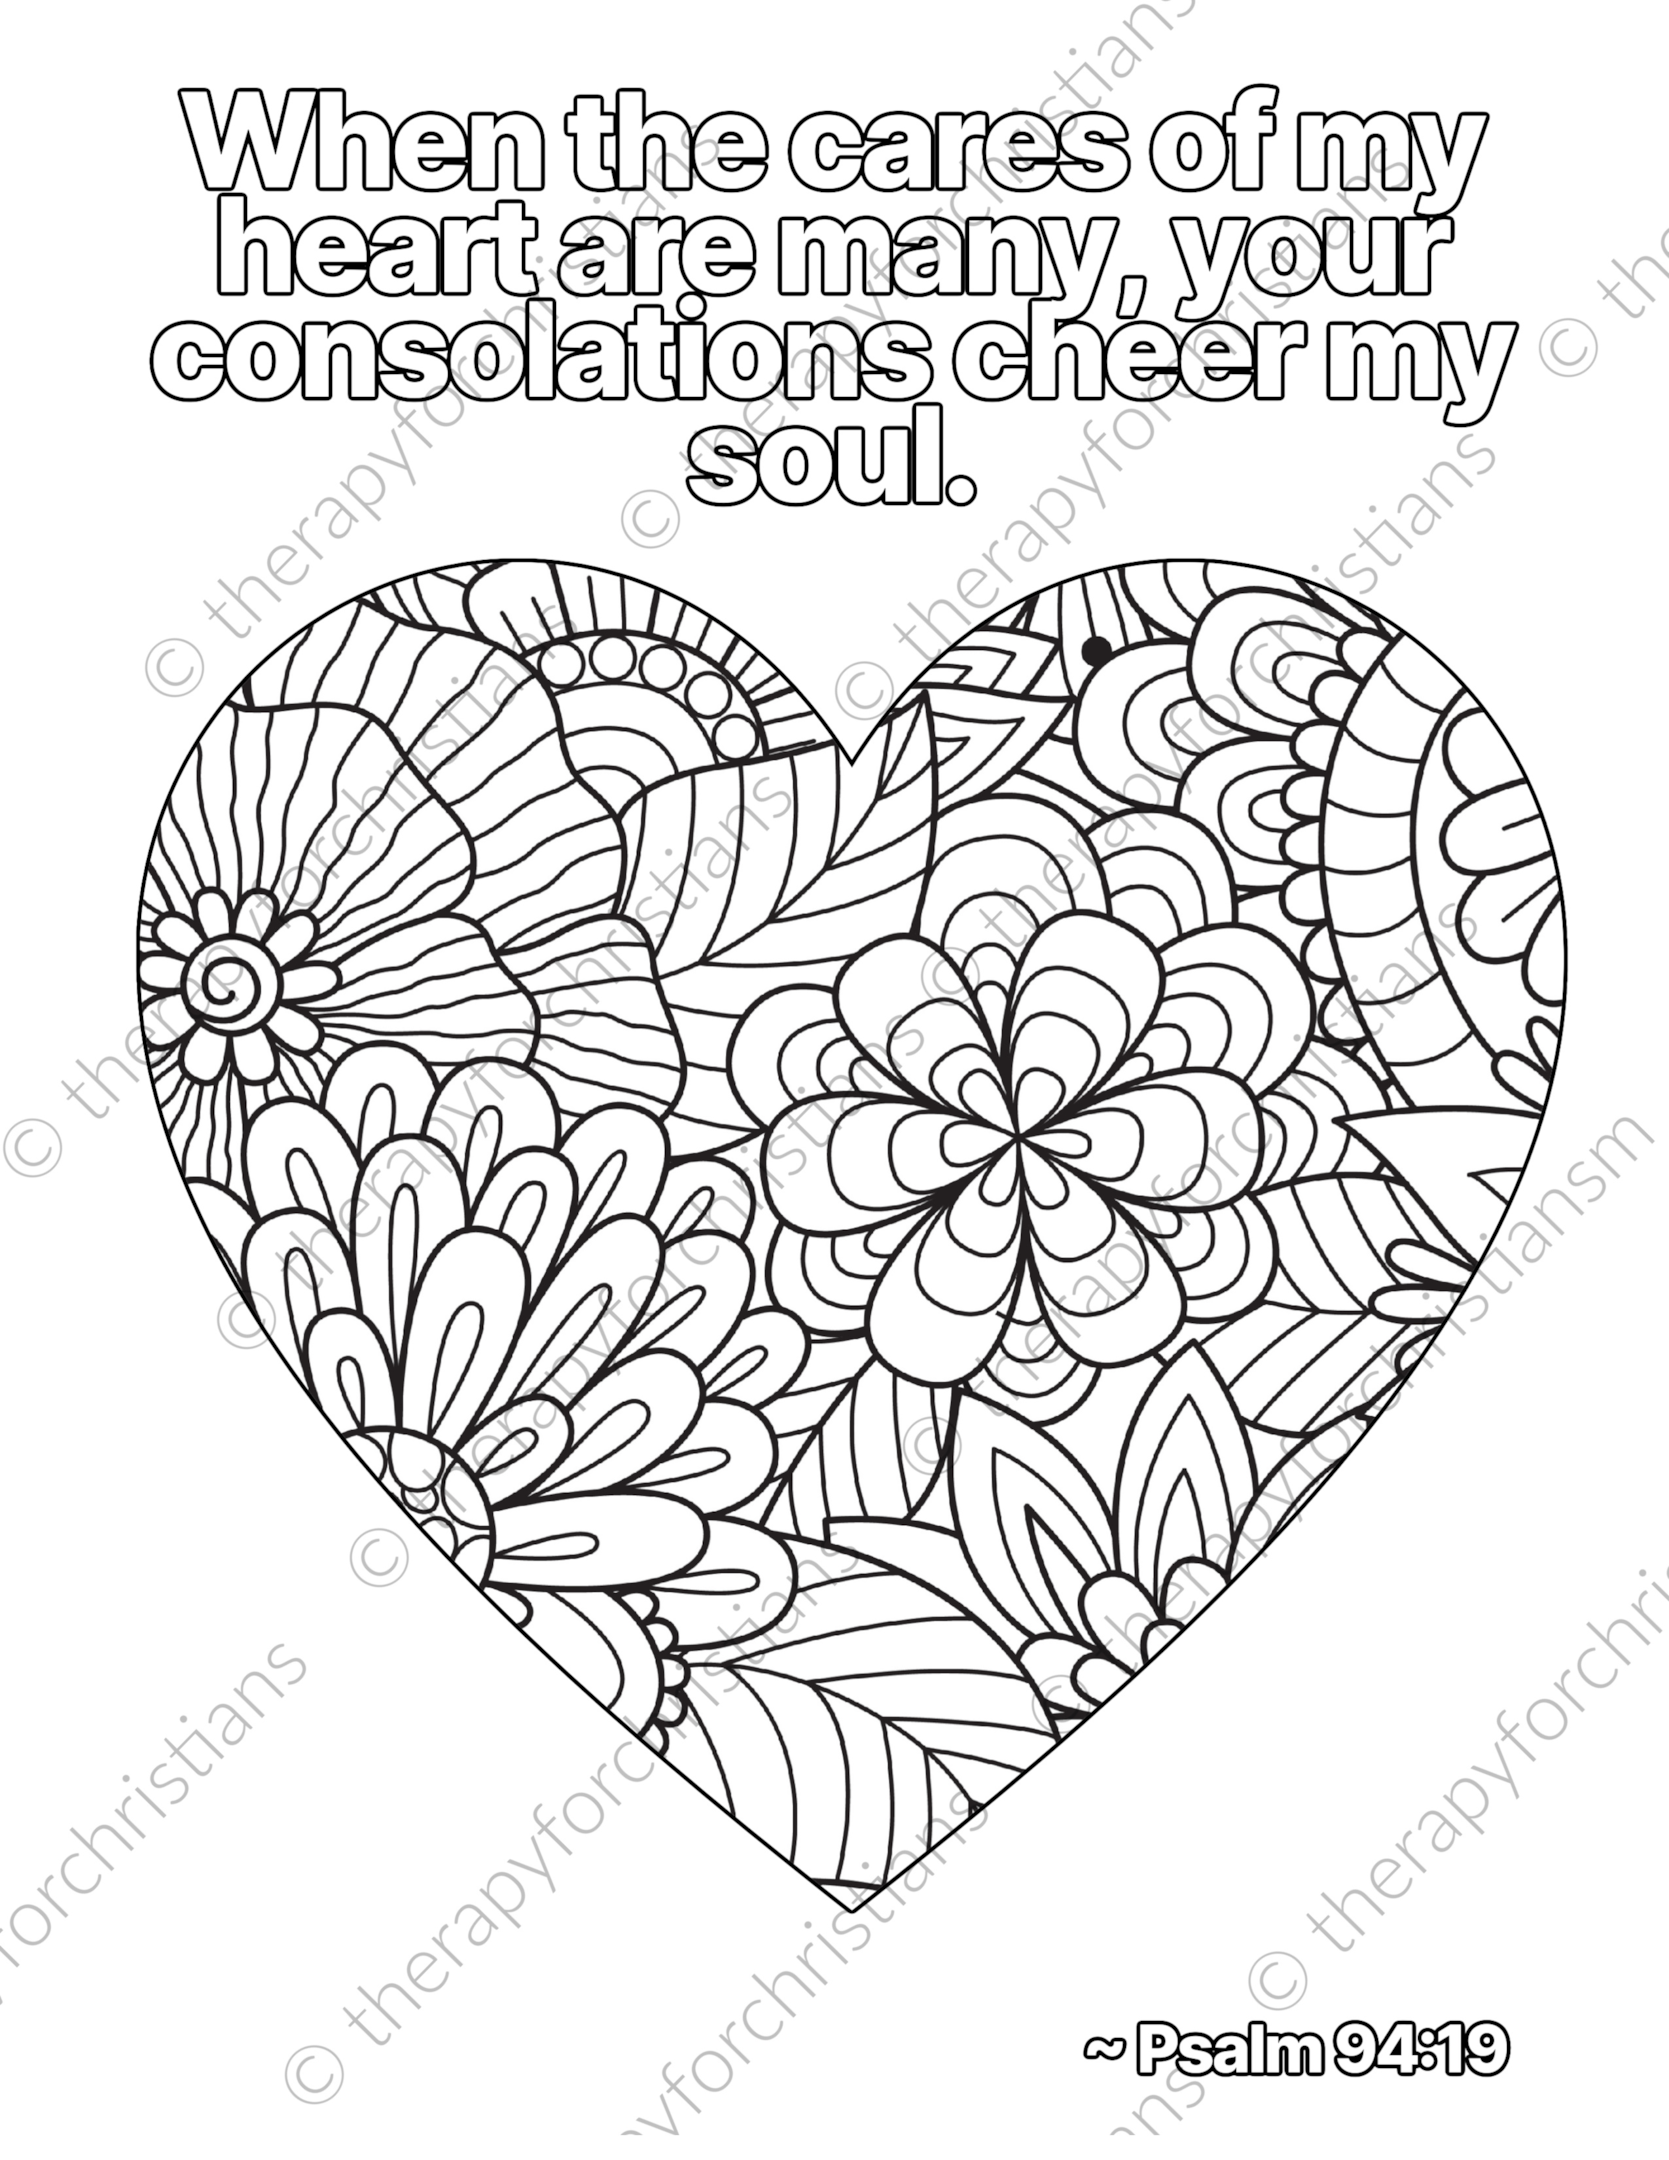 Bible verse coloring pages for adults 